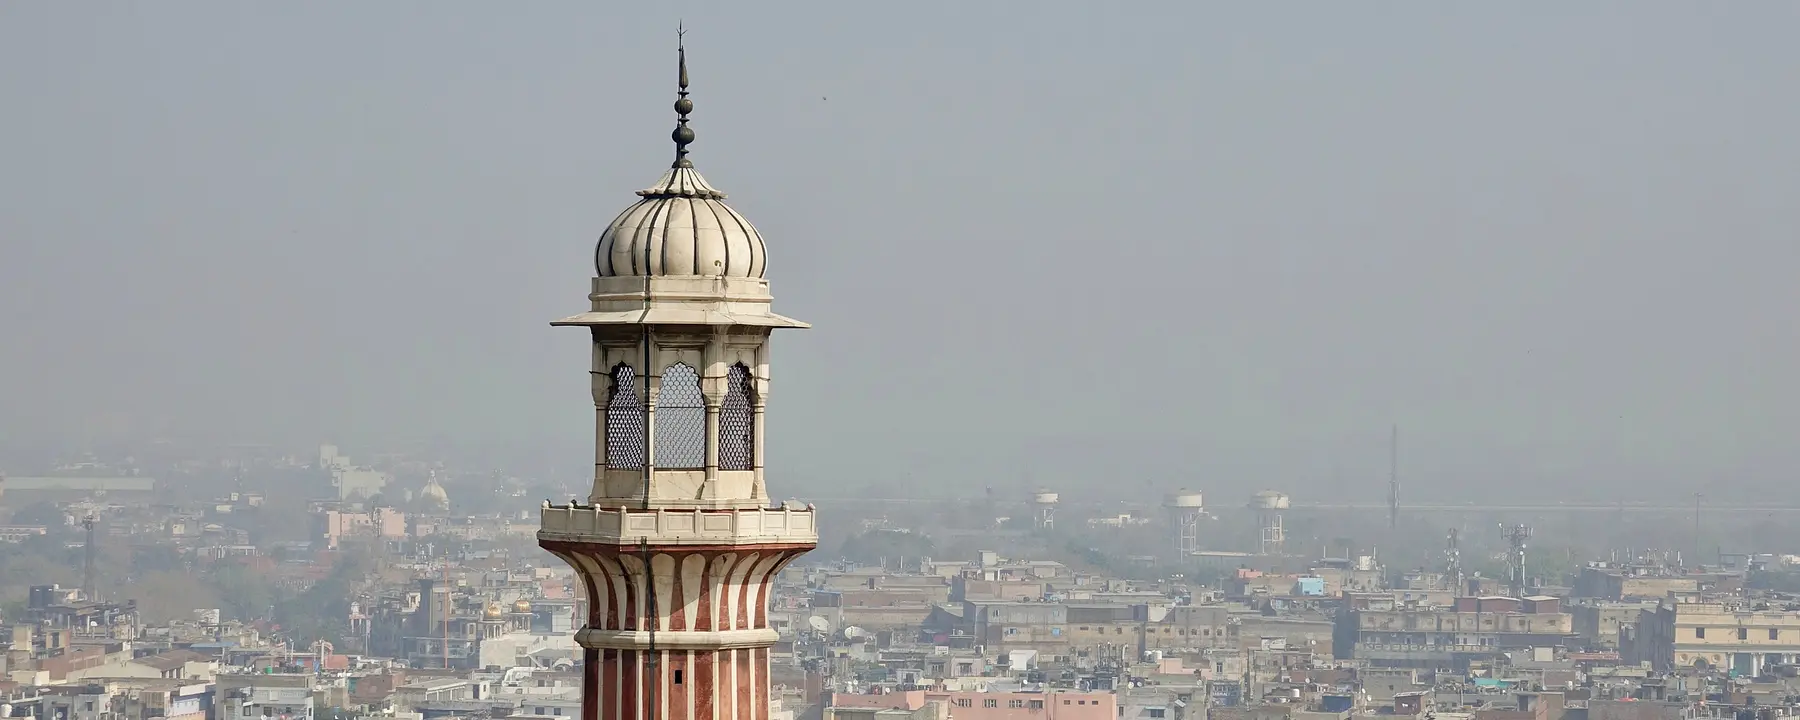 Hazy skies surround a minaret over the old section of Delhi, India.